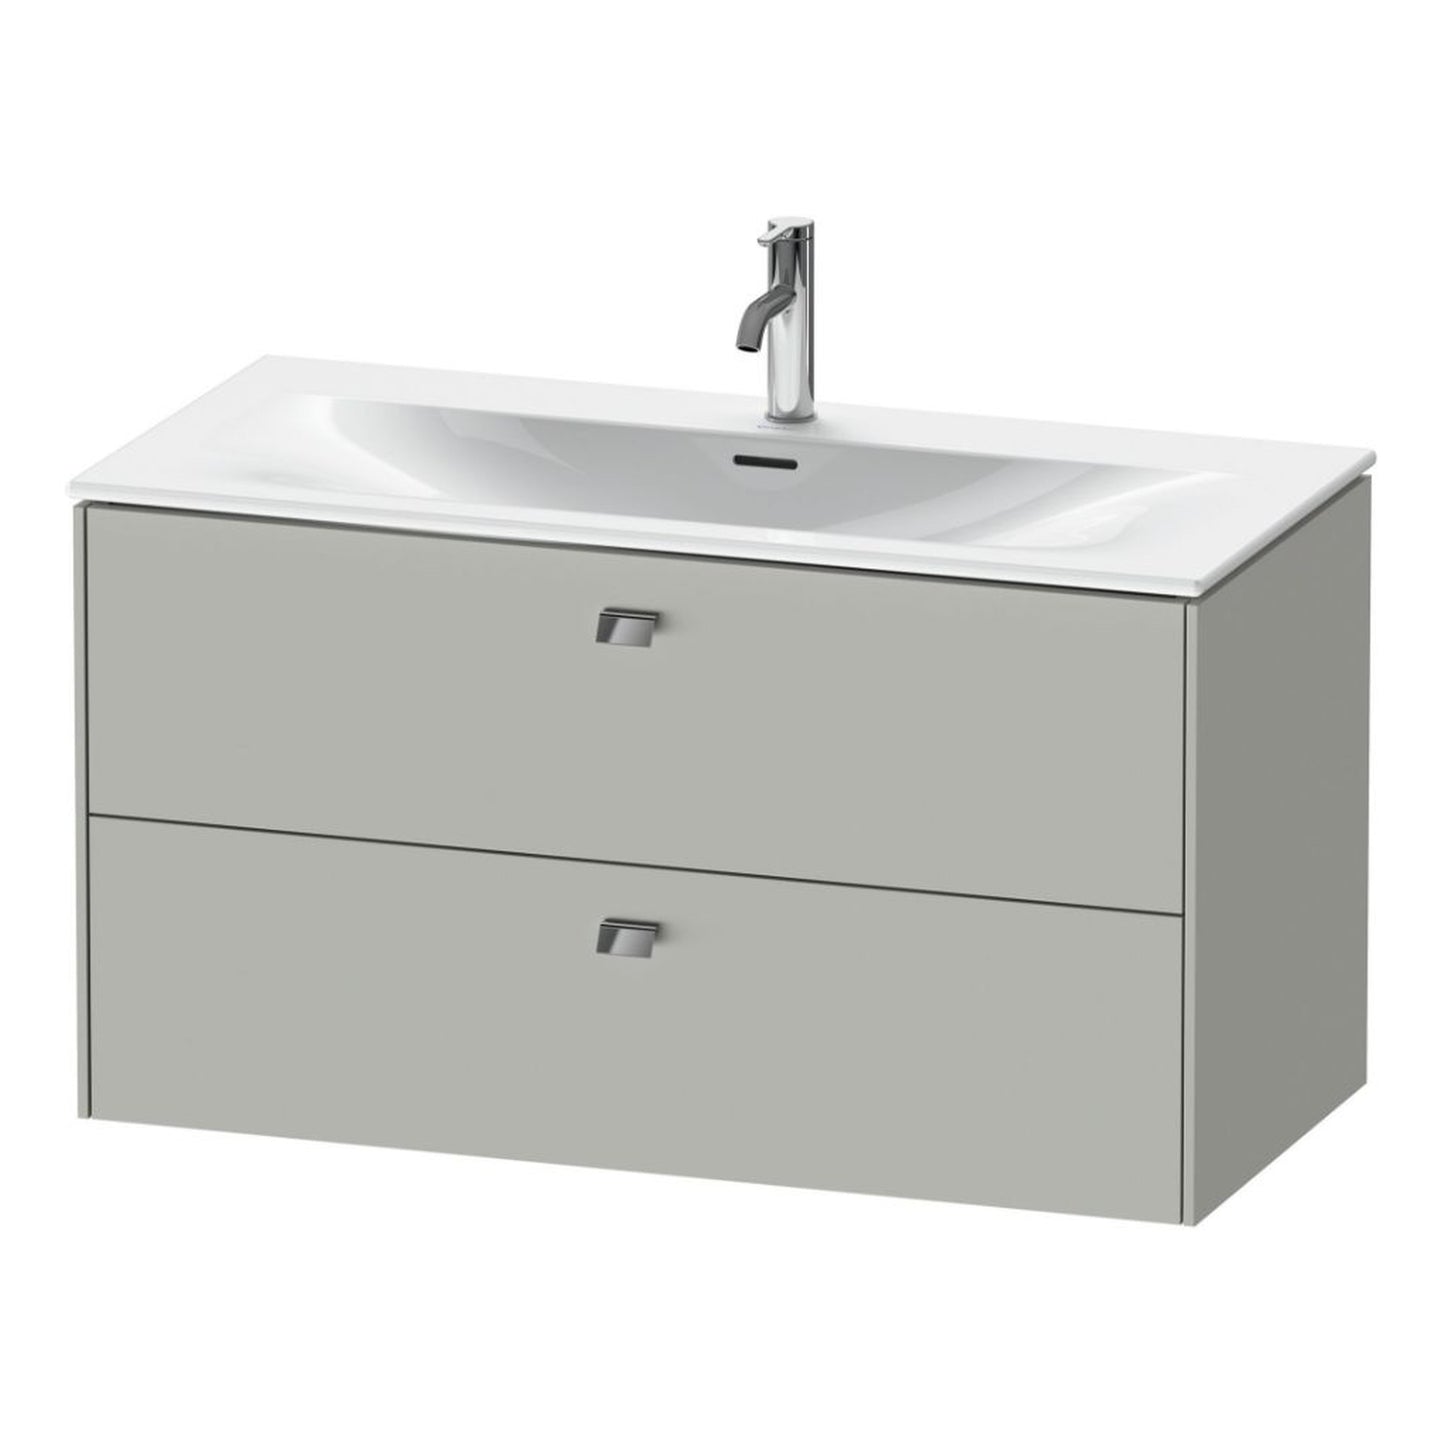 Duravit Brioso BR43130 40" x 22" x 19" Two Drawer Wall-Mount Vanity Unit in Concrete Grey Matt and Chrome Handle